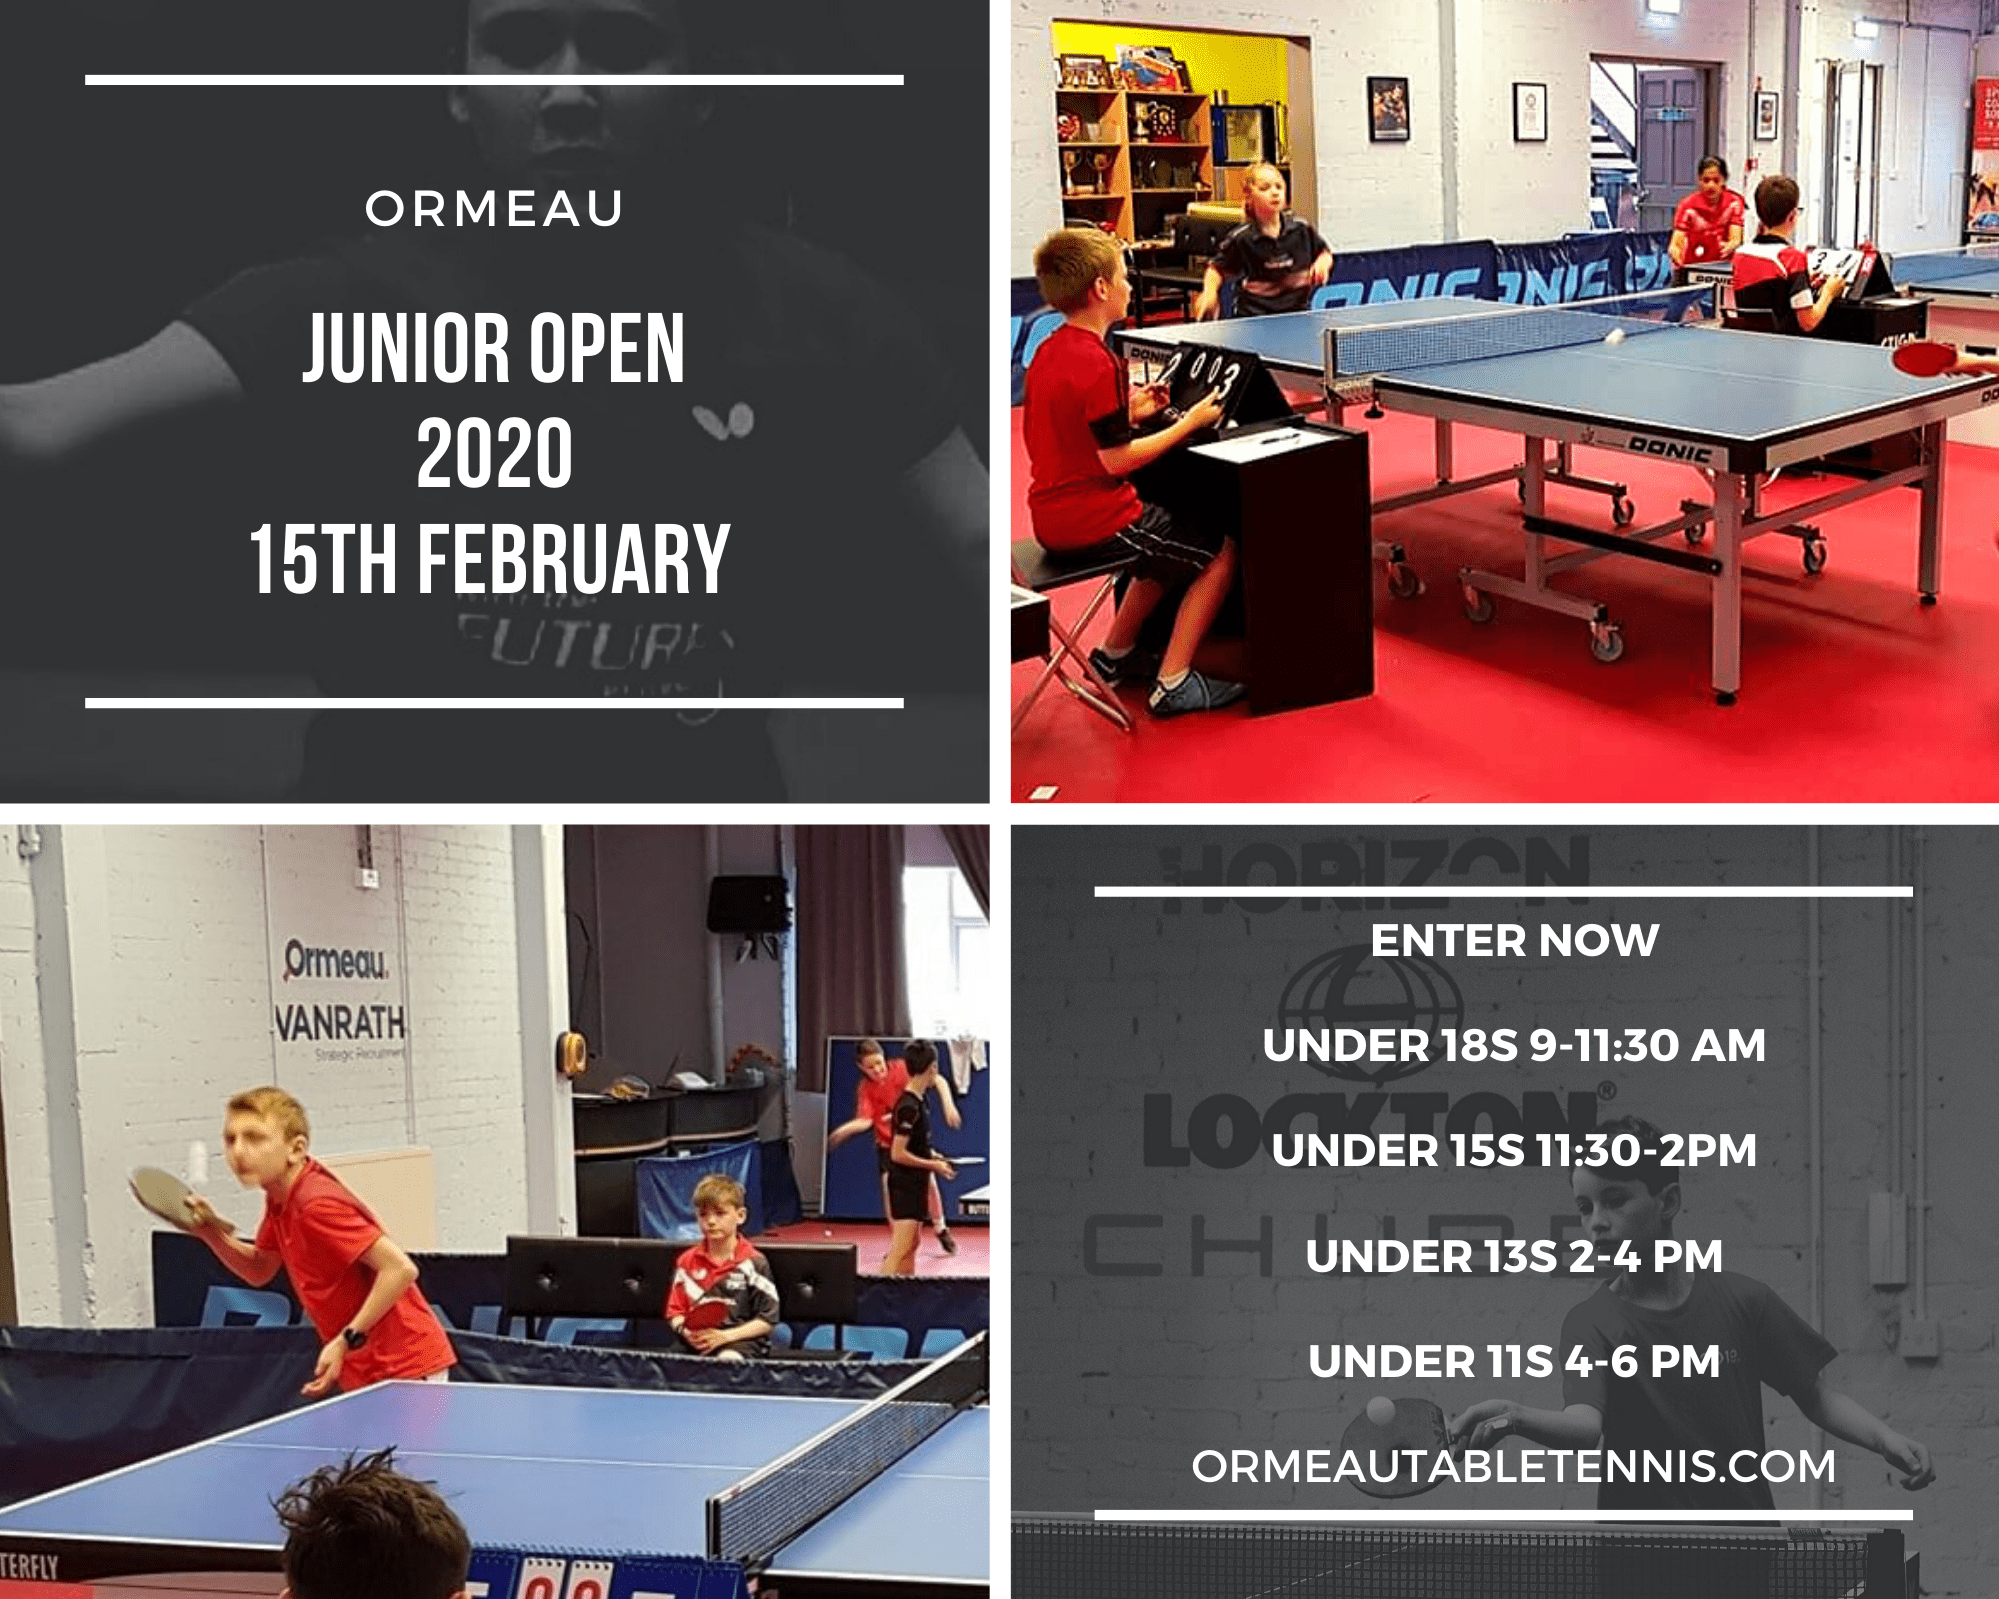 Over 30 entries for Ormeau Junior Open with a day to go! Enter Now!